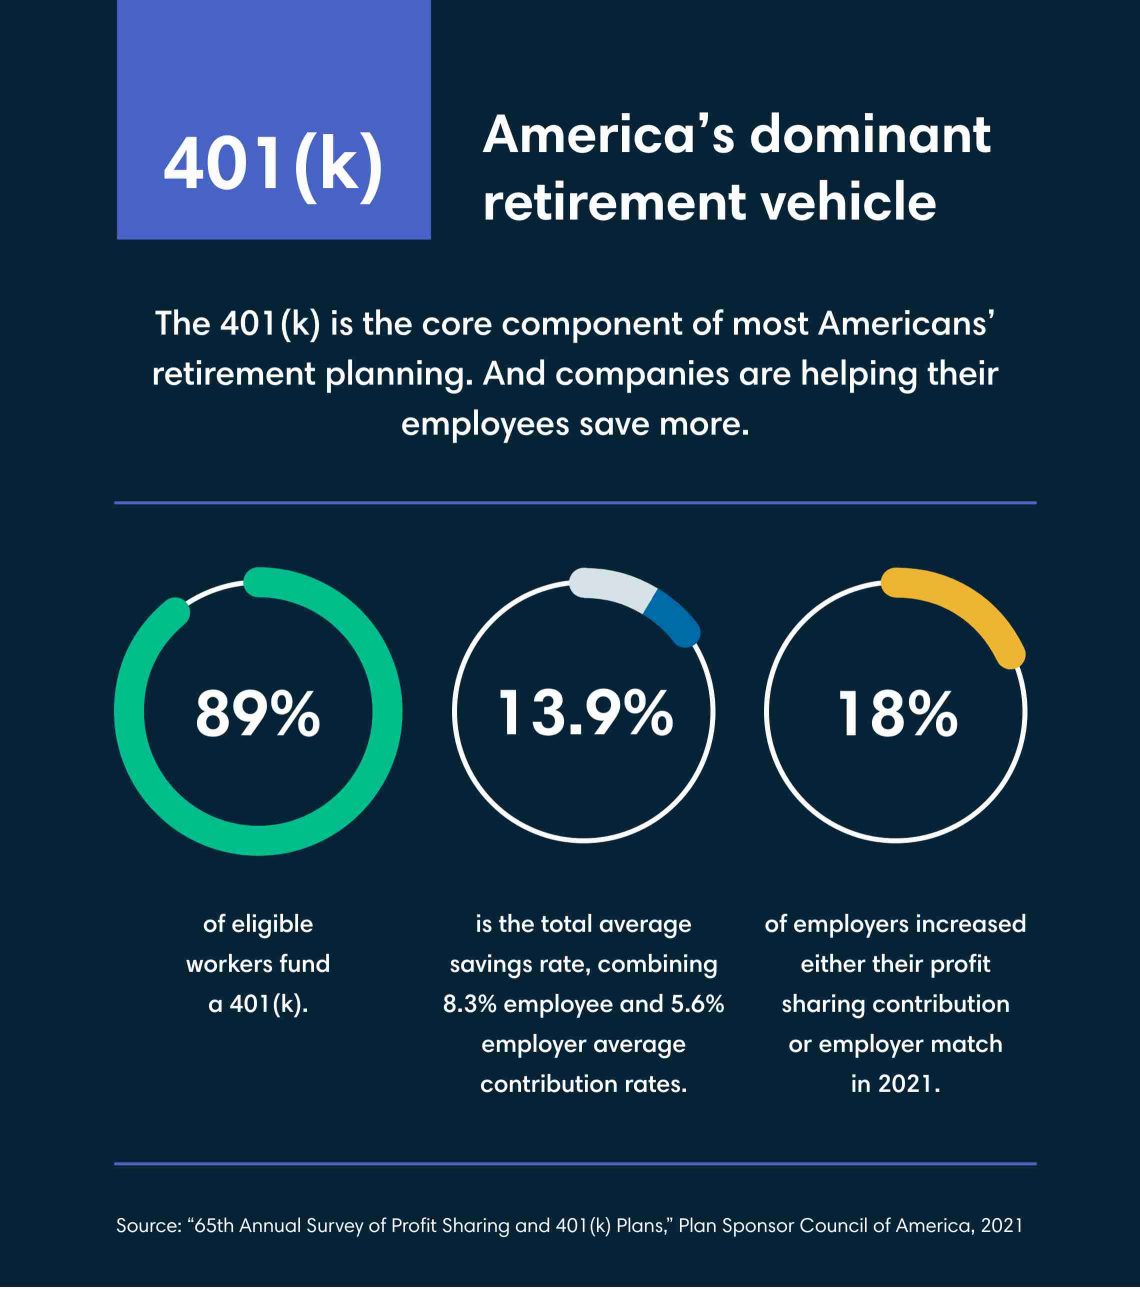 Infographic covering the dominance of the 401(k) in America